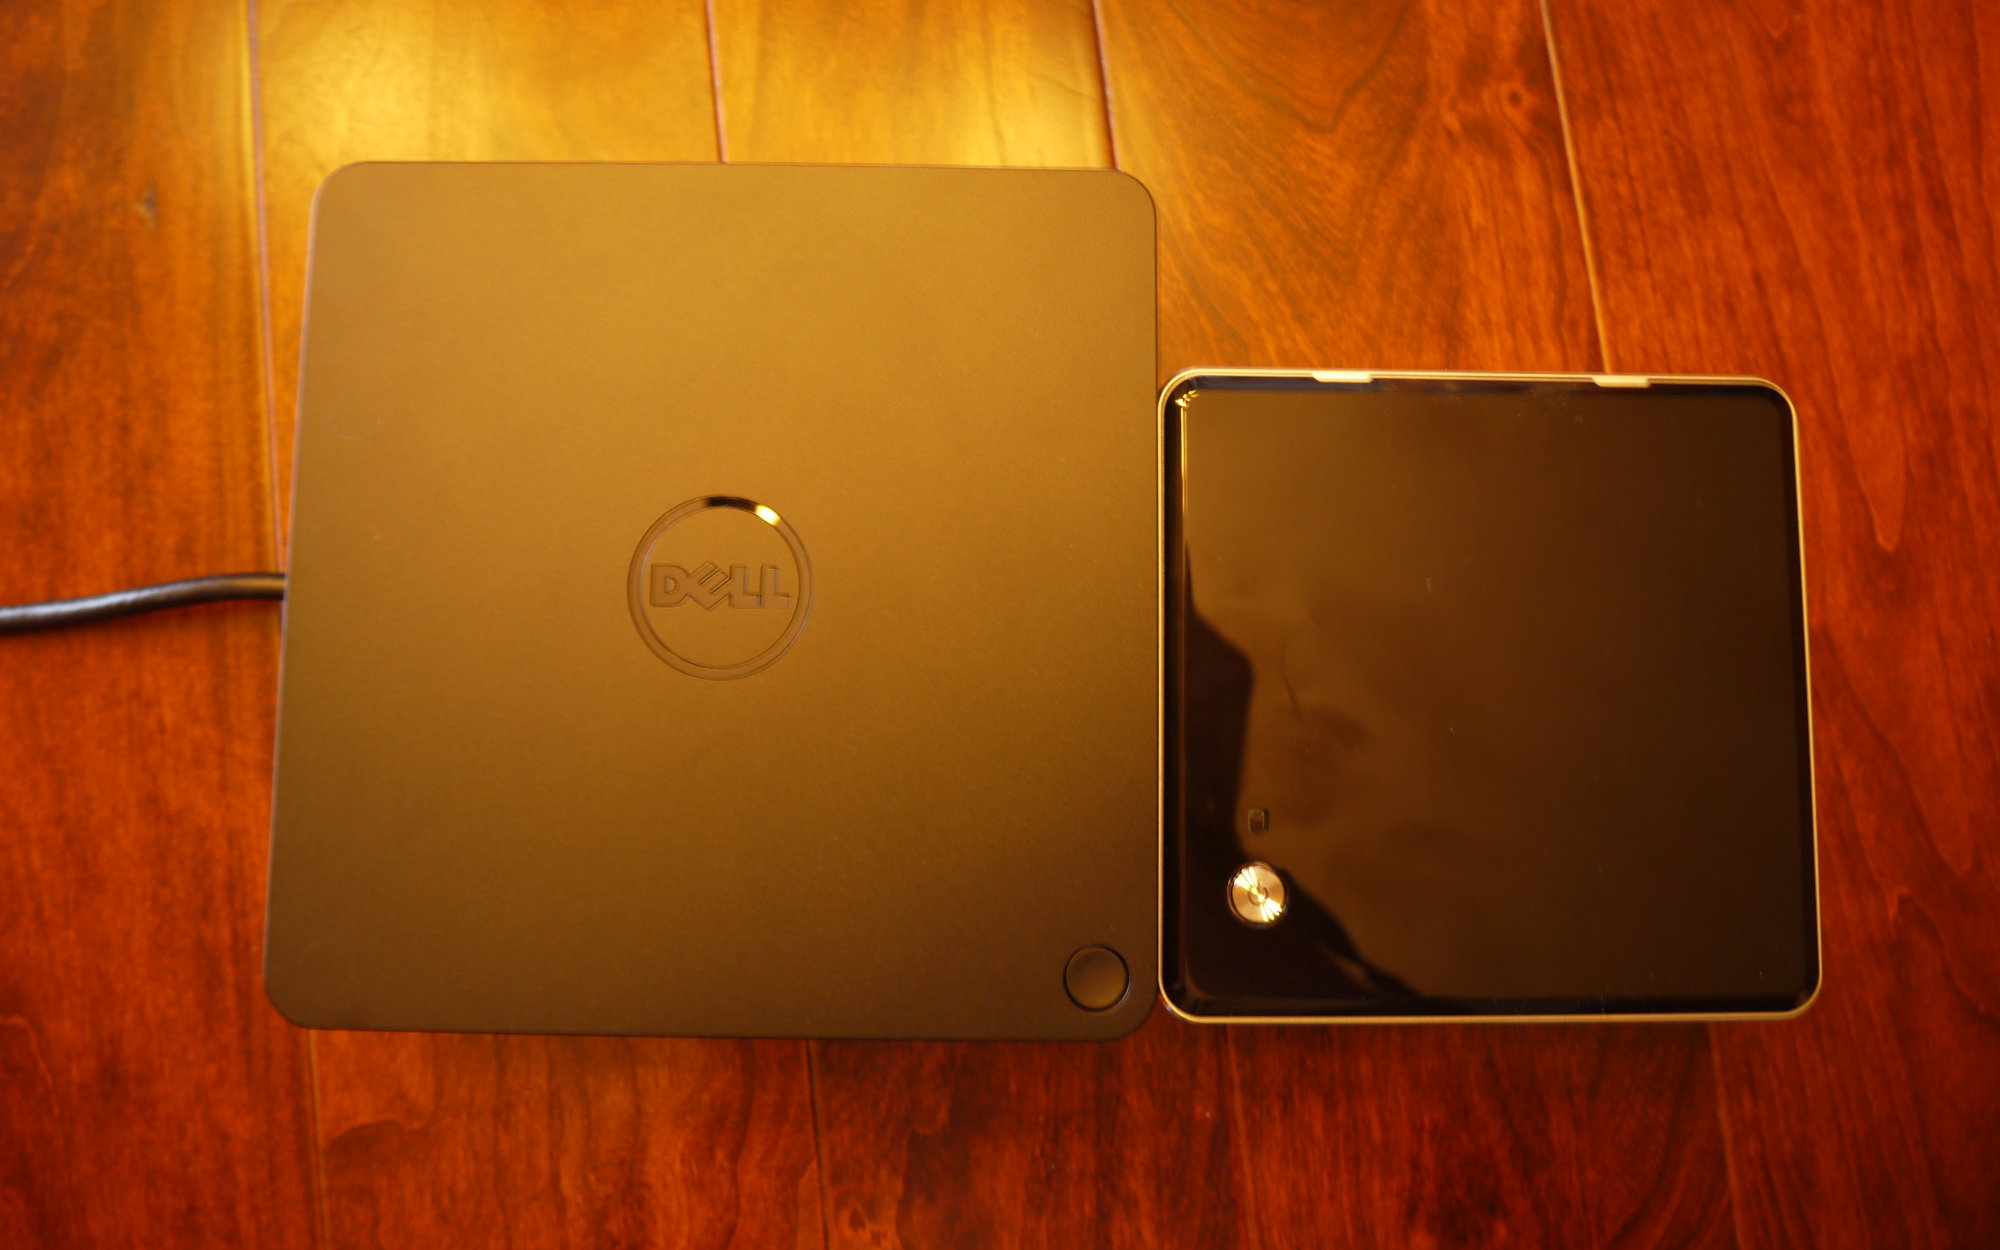 The TB15 and the NUC5i3RYK side by side